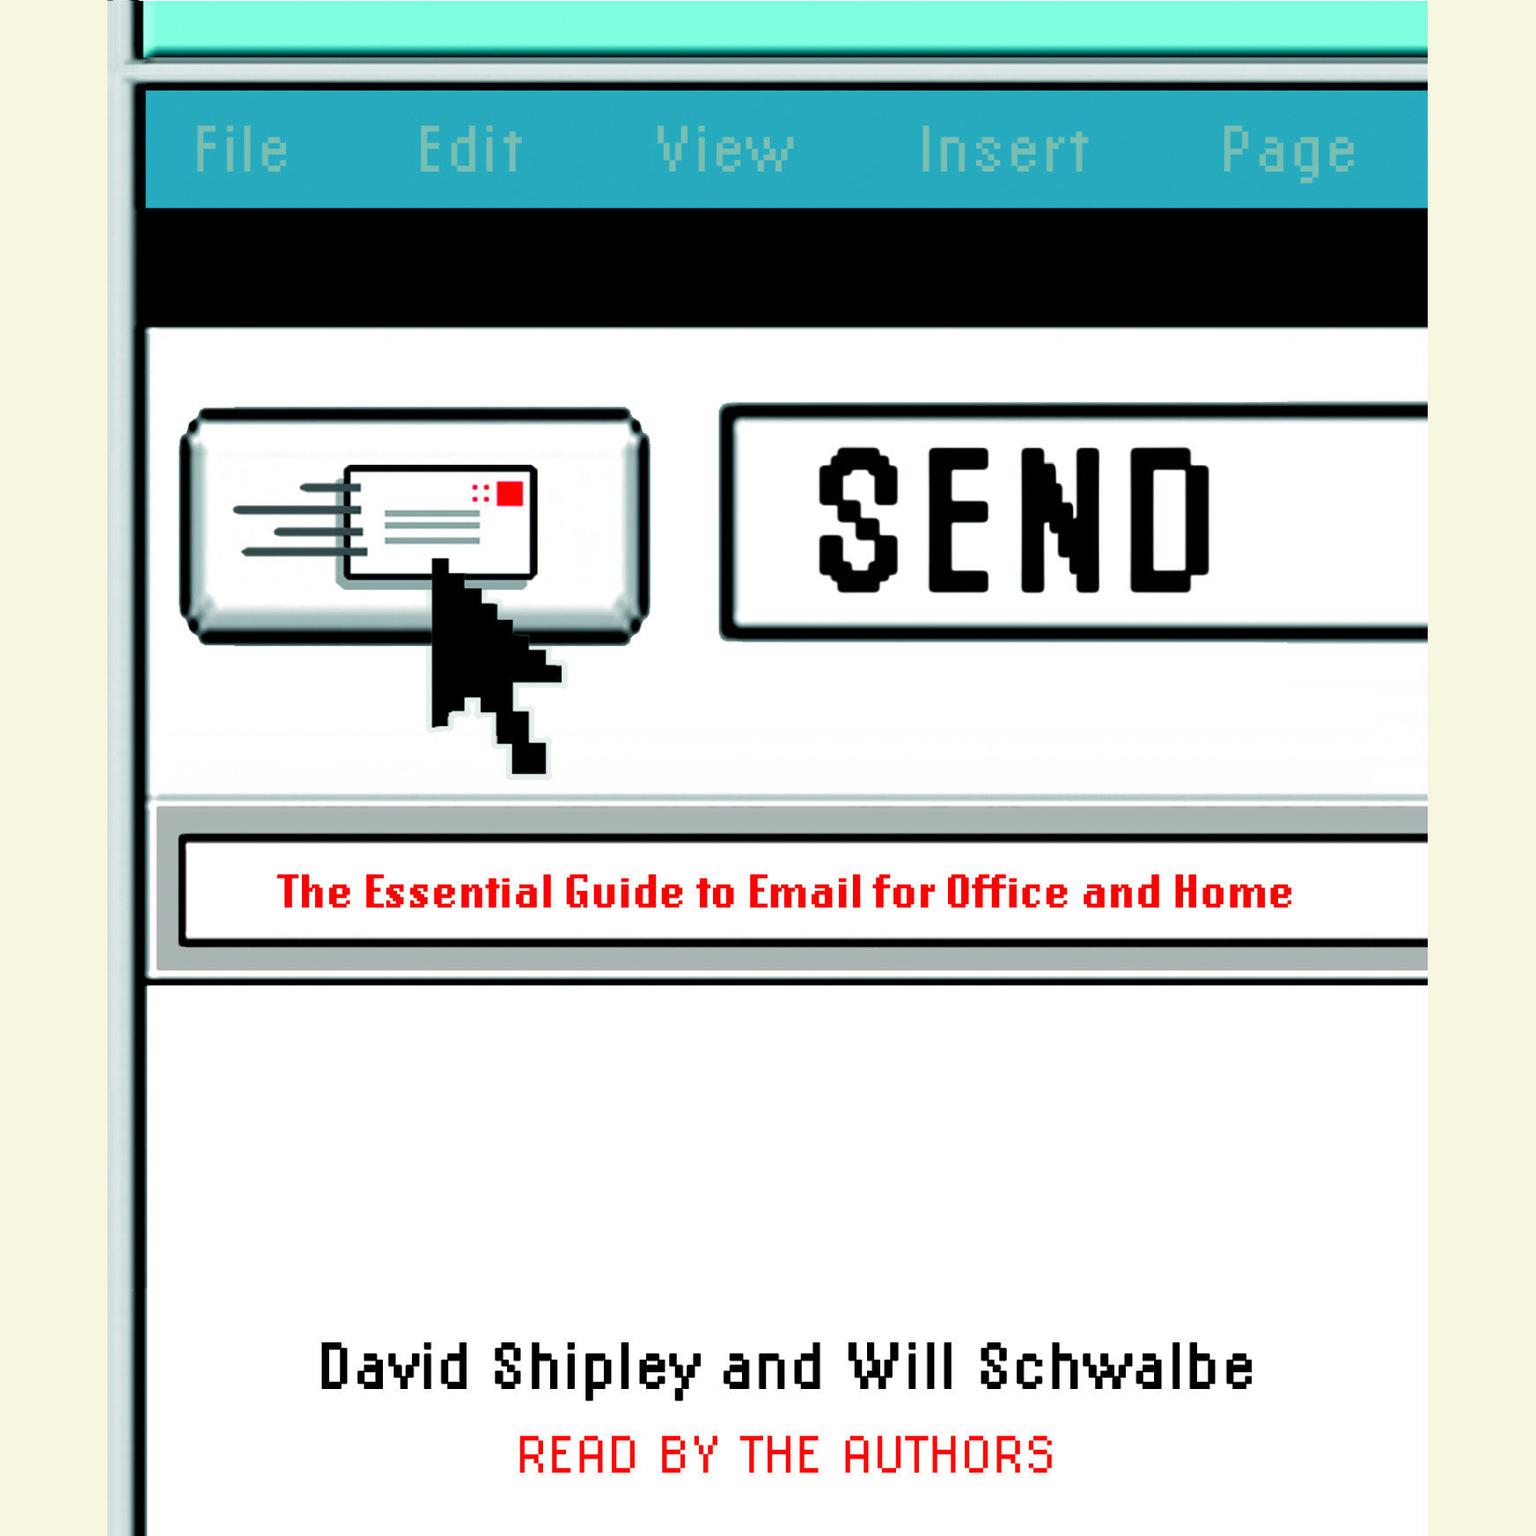 Send (Abridged): The Essential Guide to Email for Office and Home Audiobook, by David Shipley